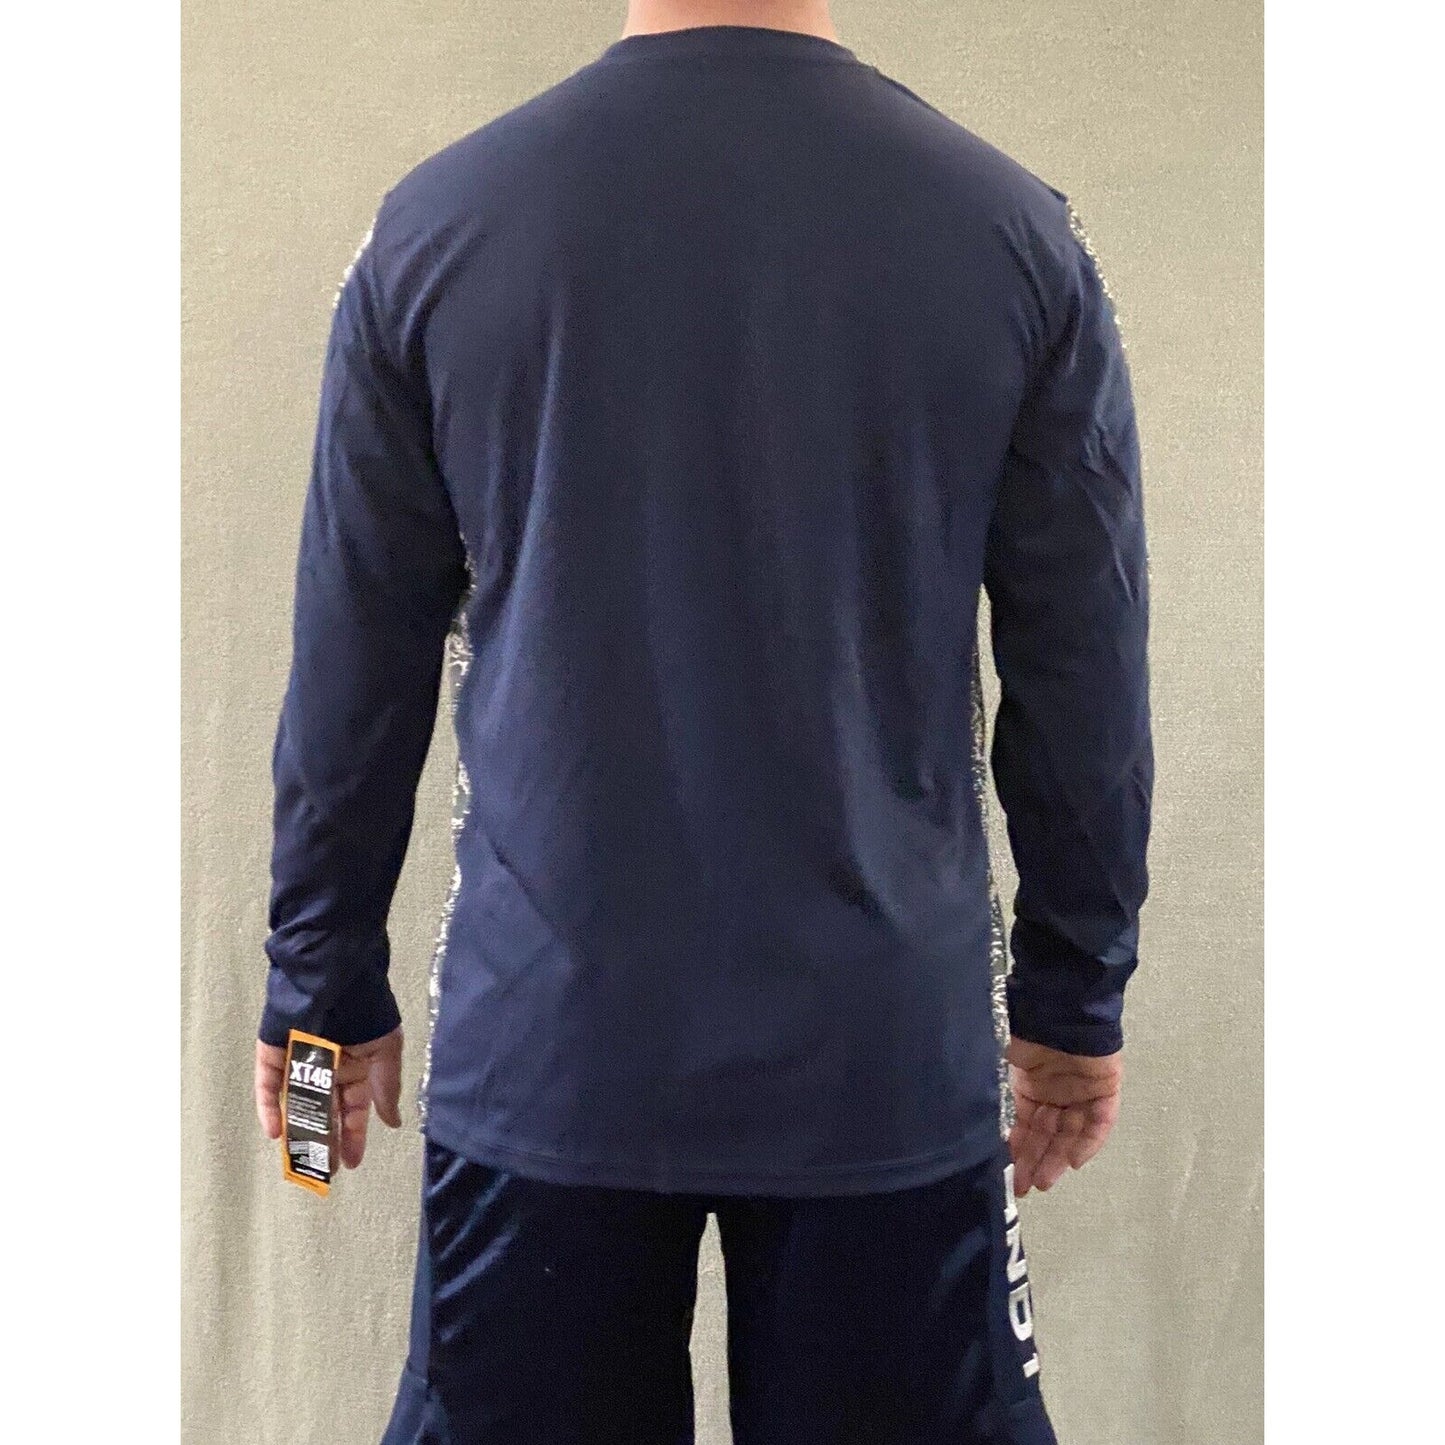 Soffe Extreme Training XT46 Mens Large Navy Blue Camo Polyester Long Sleeves NWT